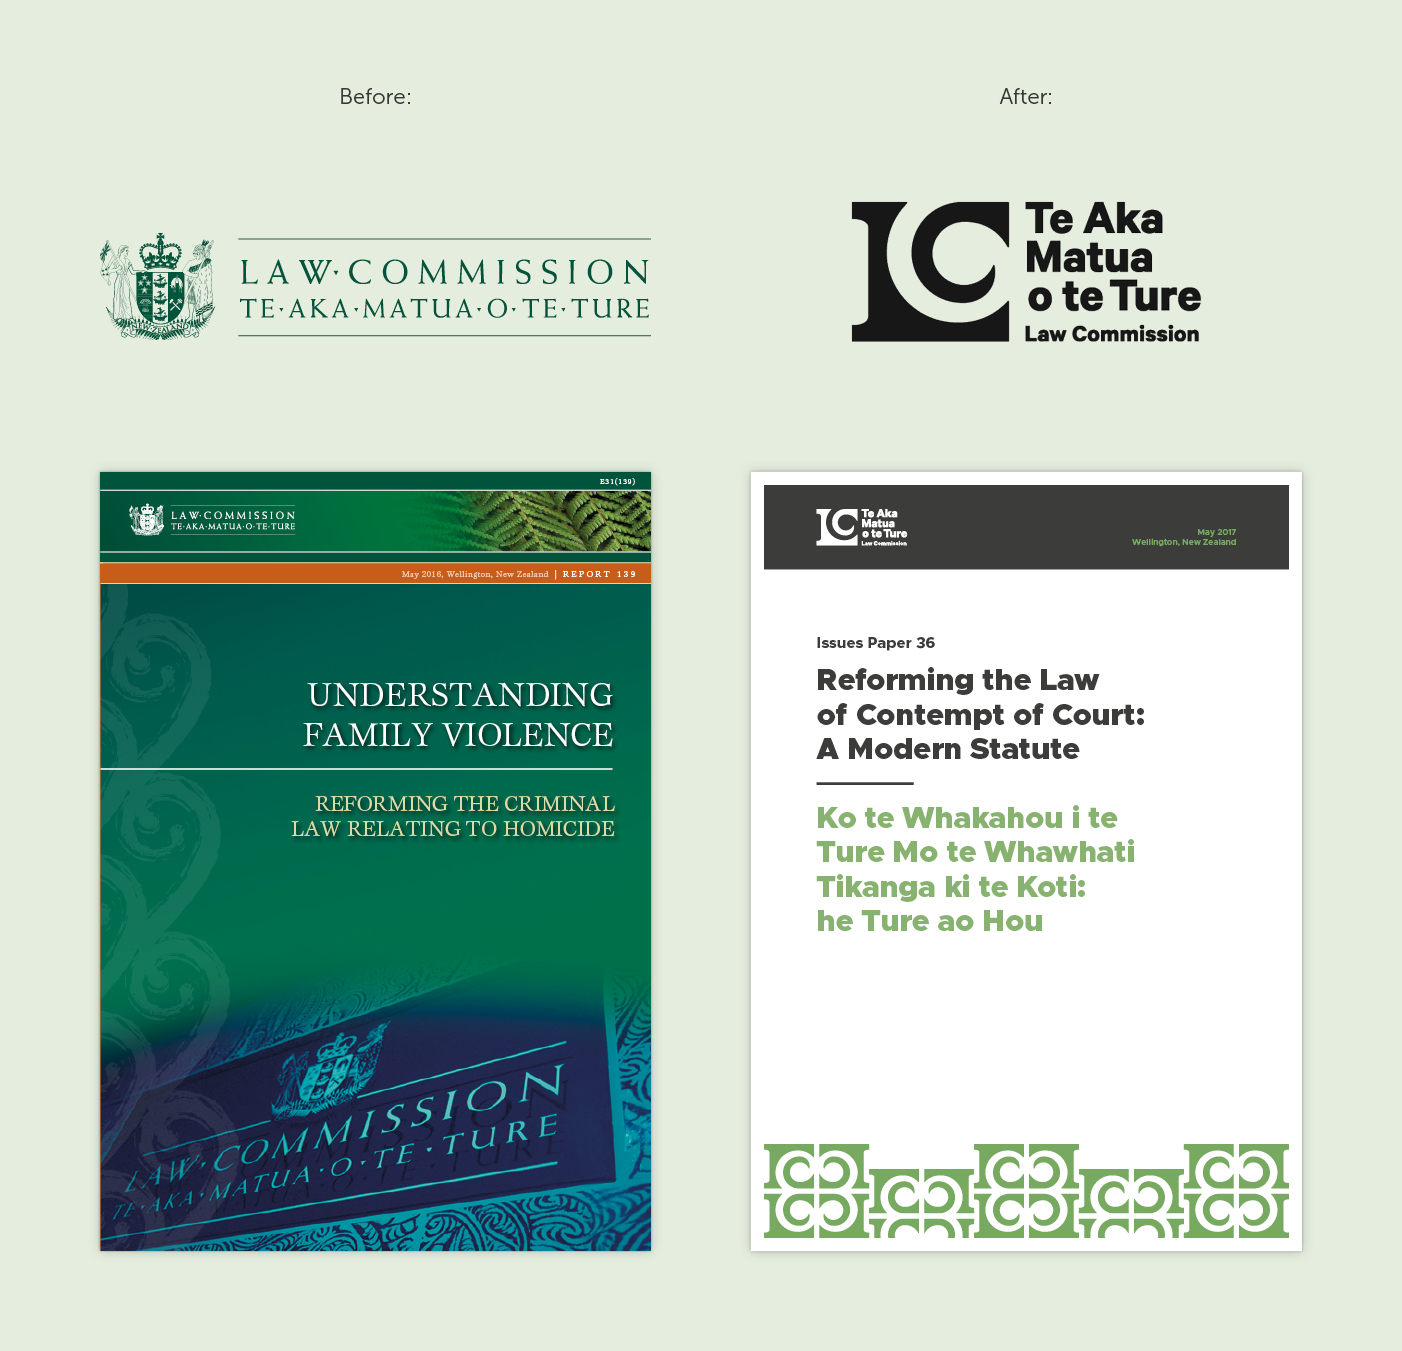 Law Commission brand before and after